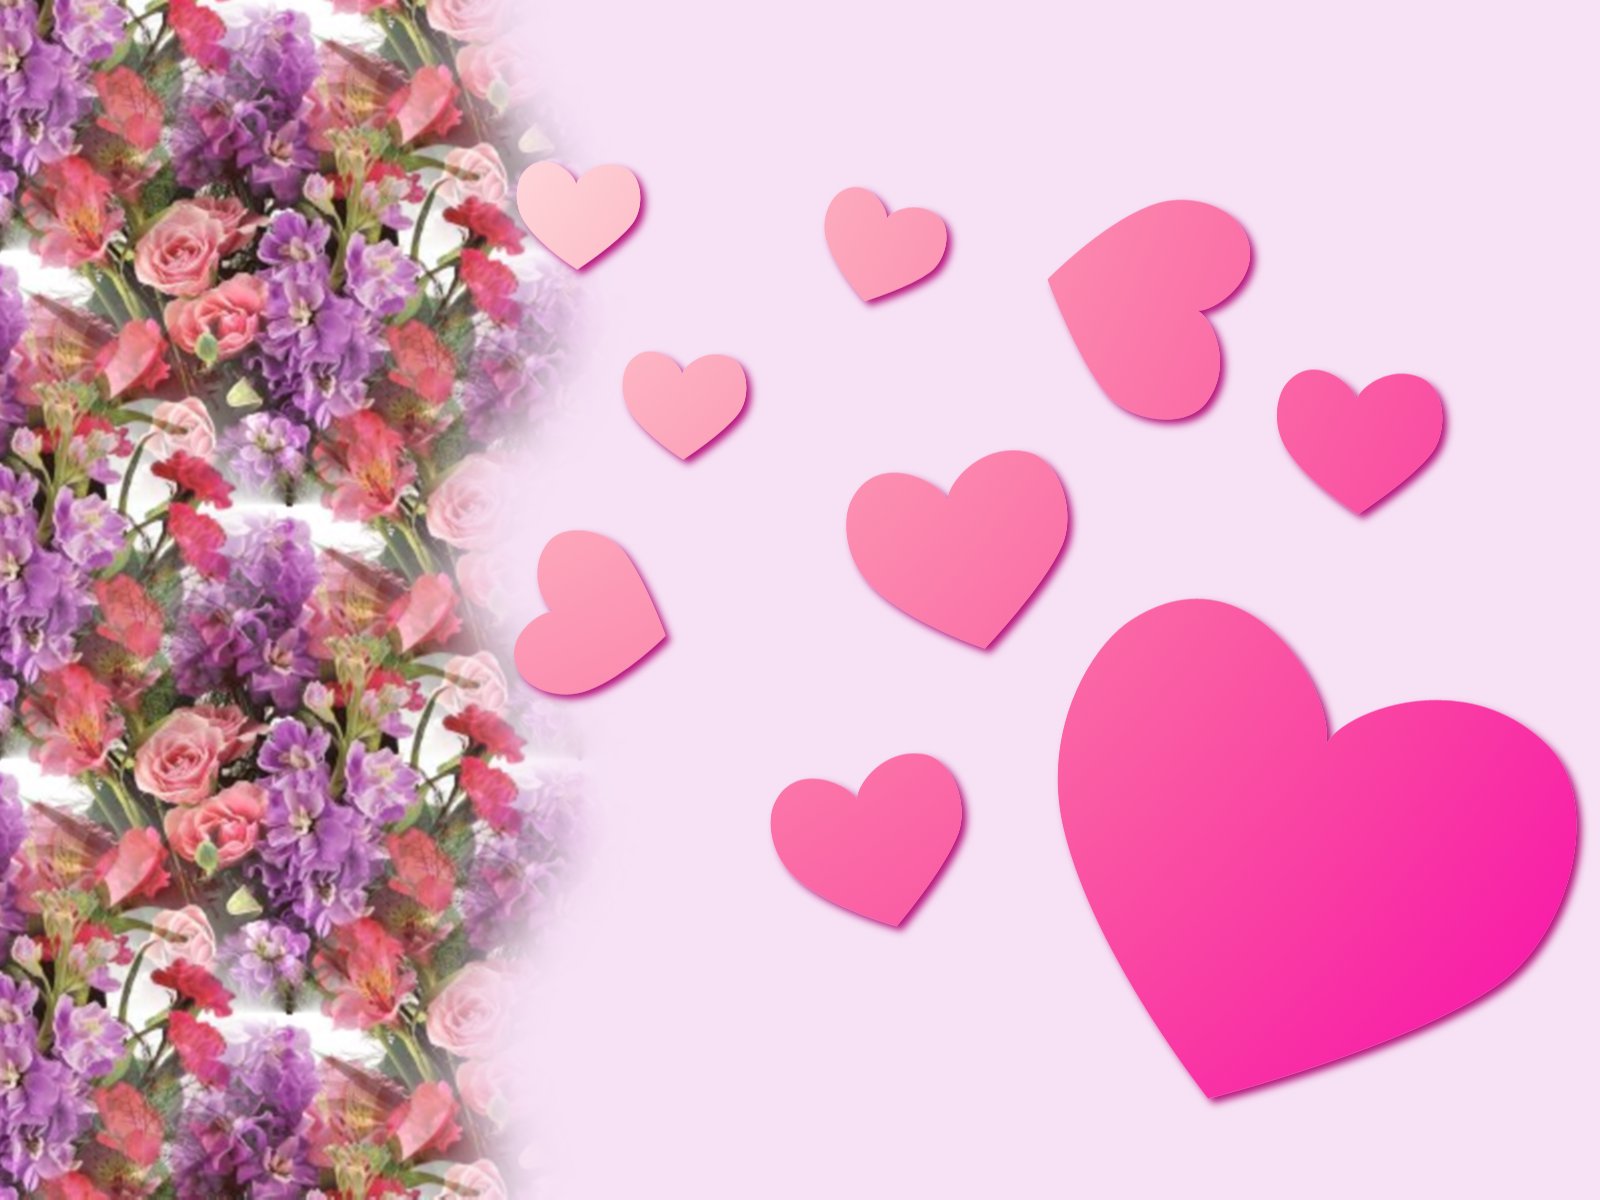 Pink Roses And Hearts Image Amp Pictures Becuo